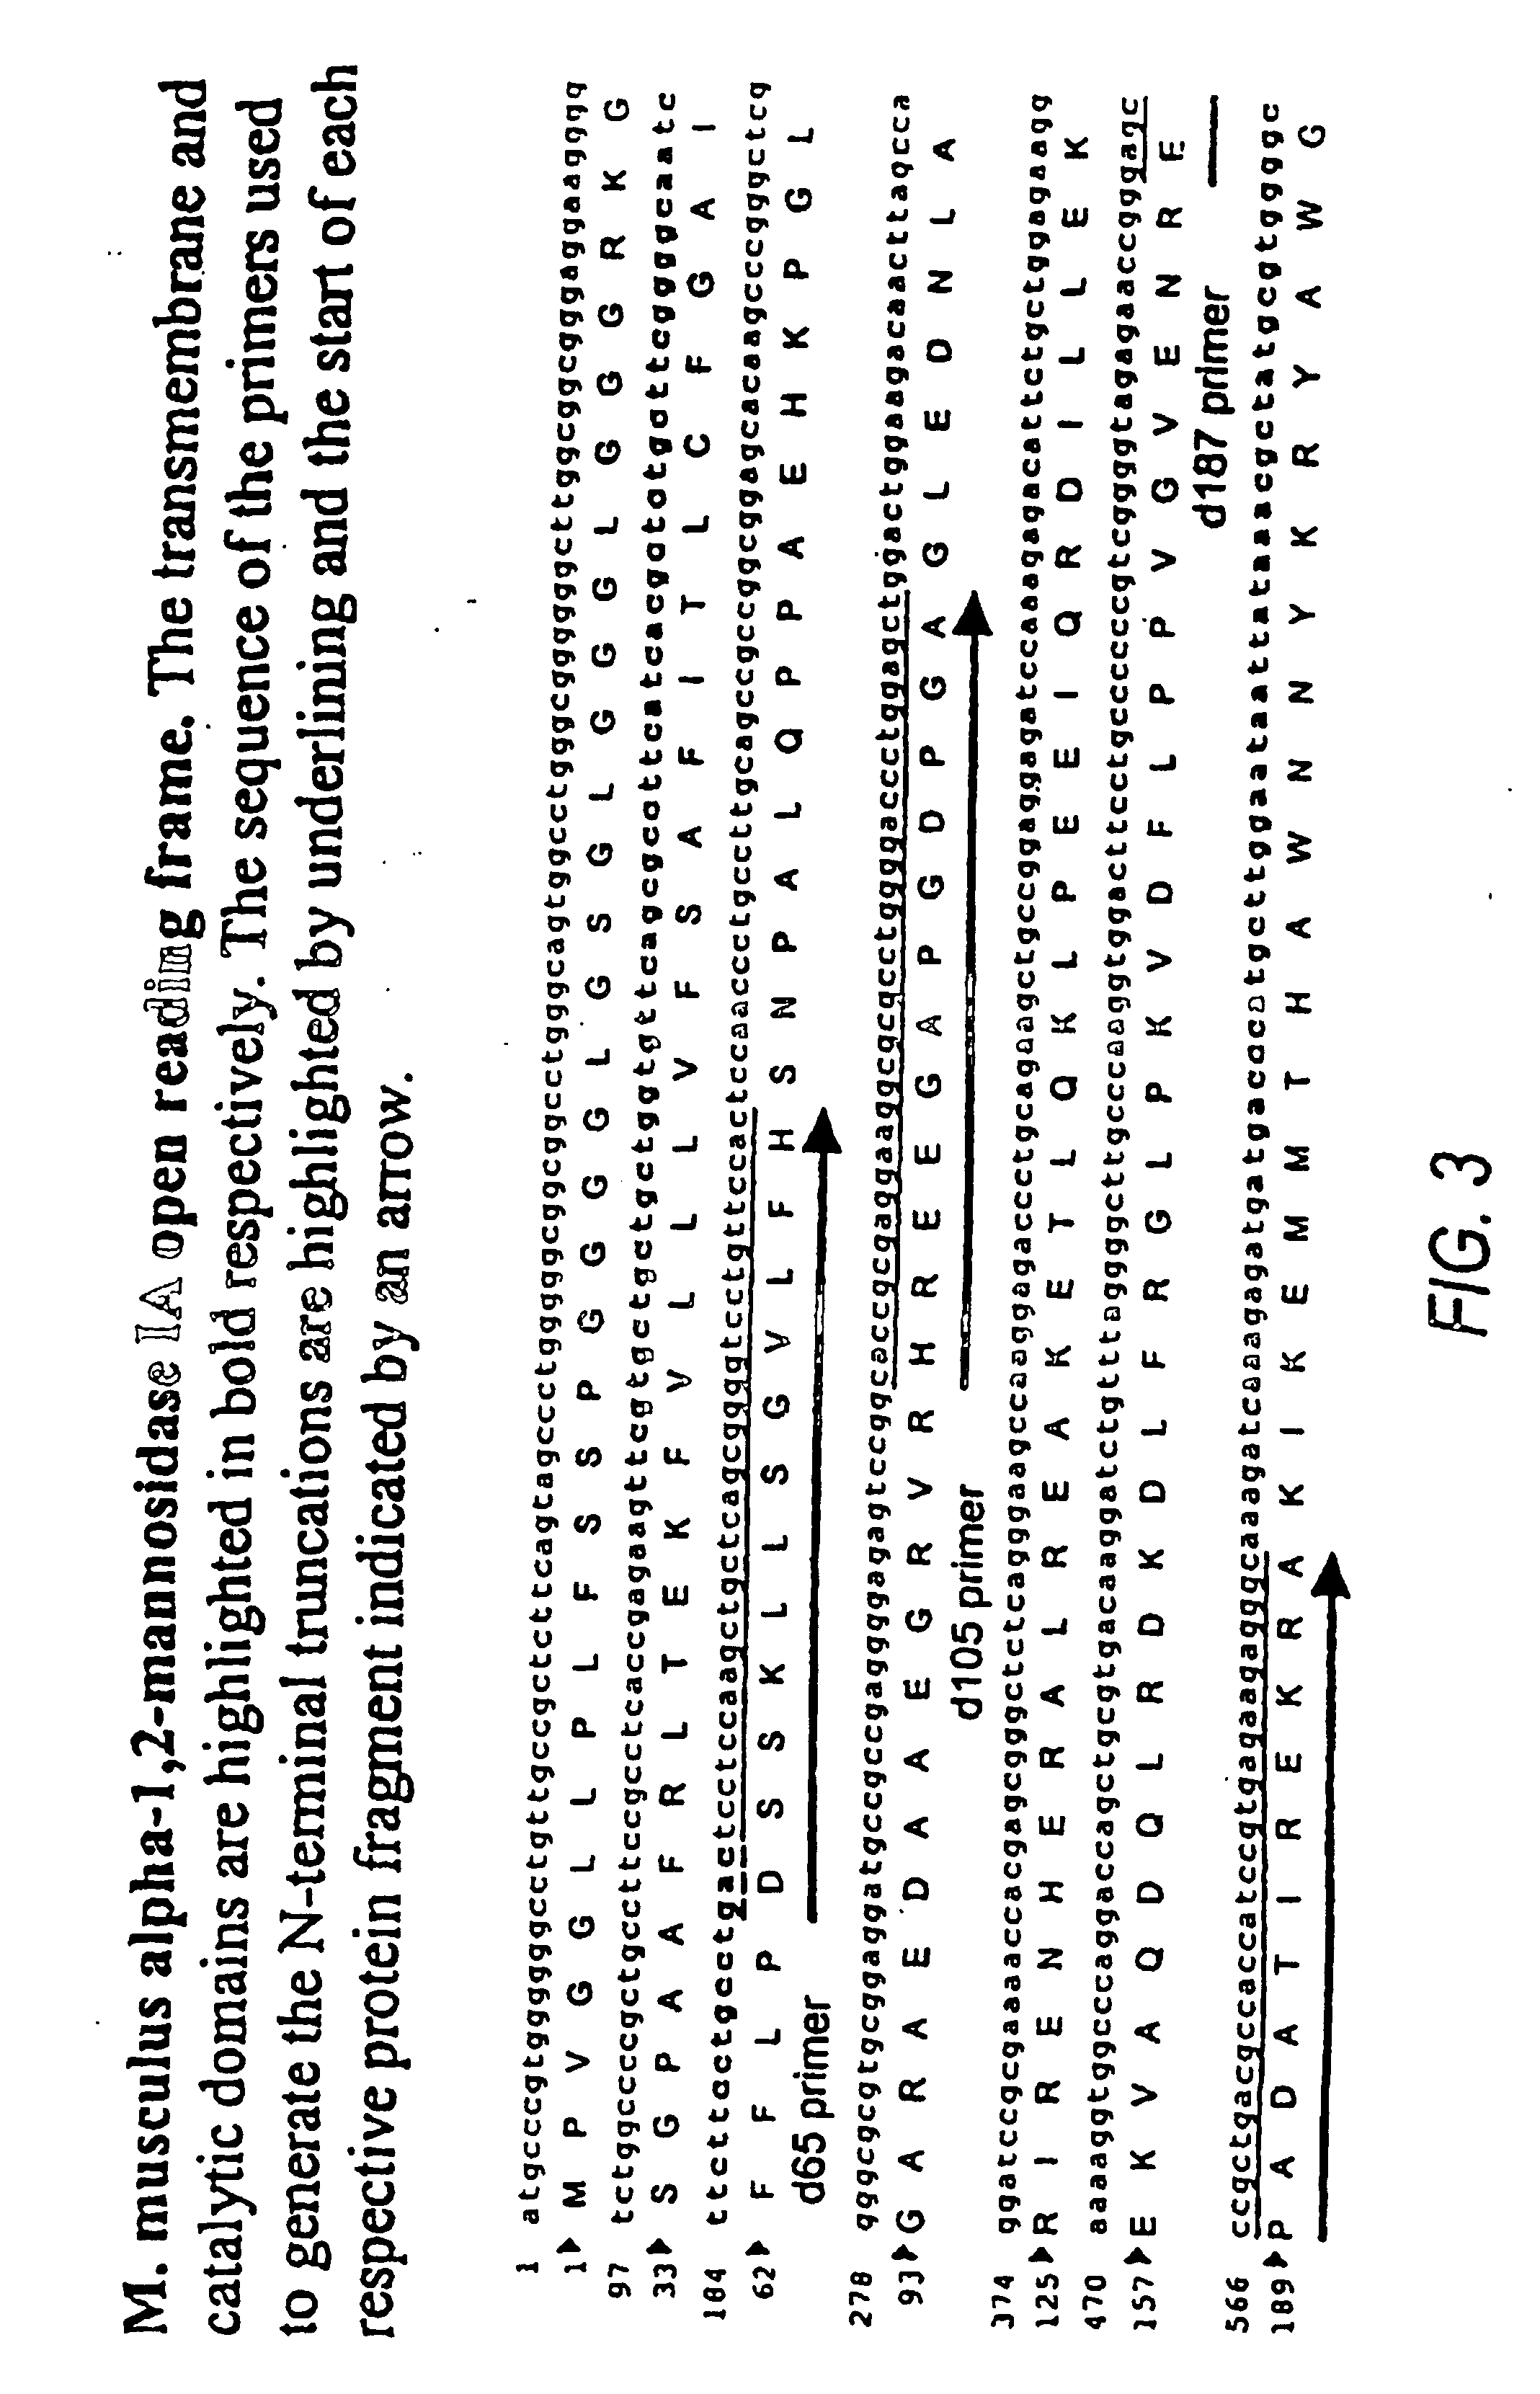 Production of modified glycoproteins having multiple antennary structures